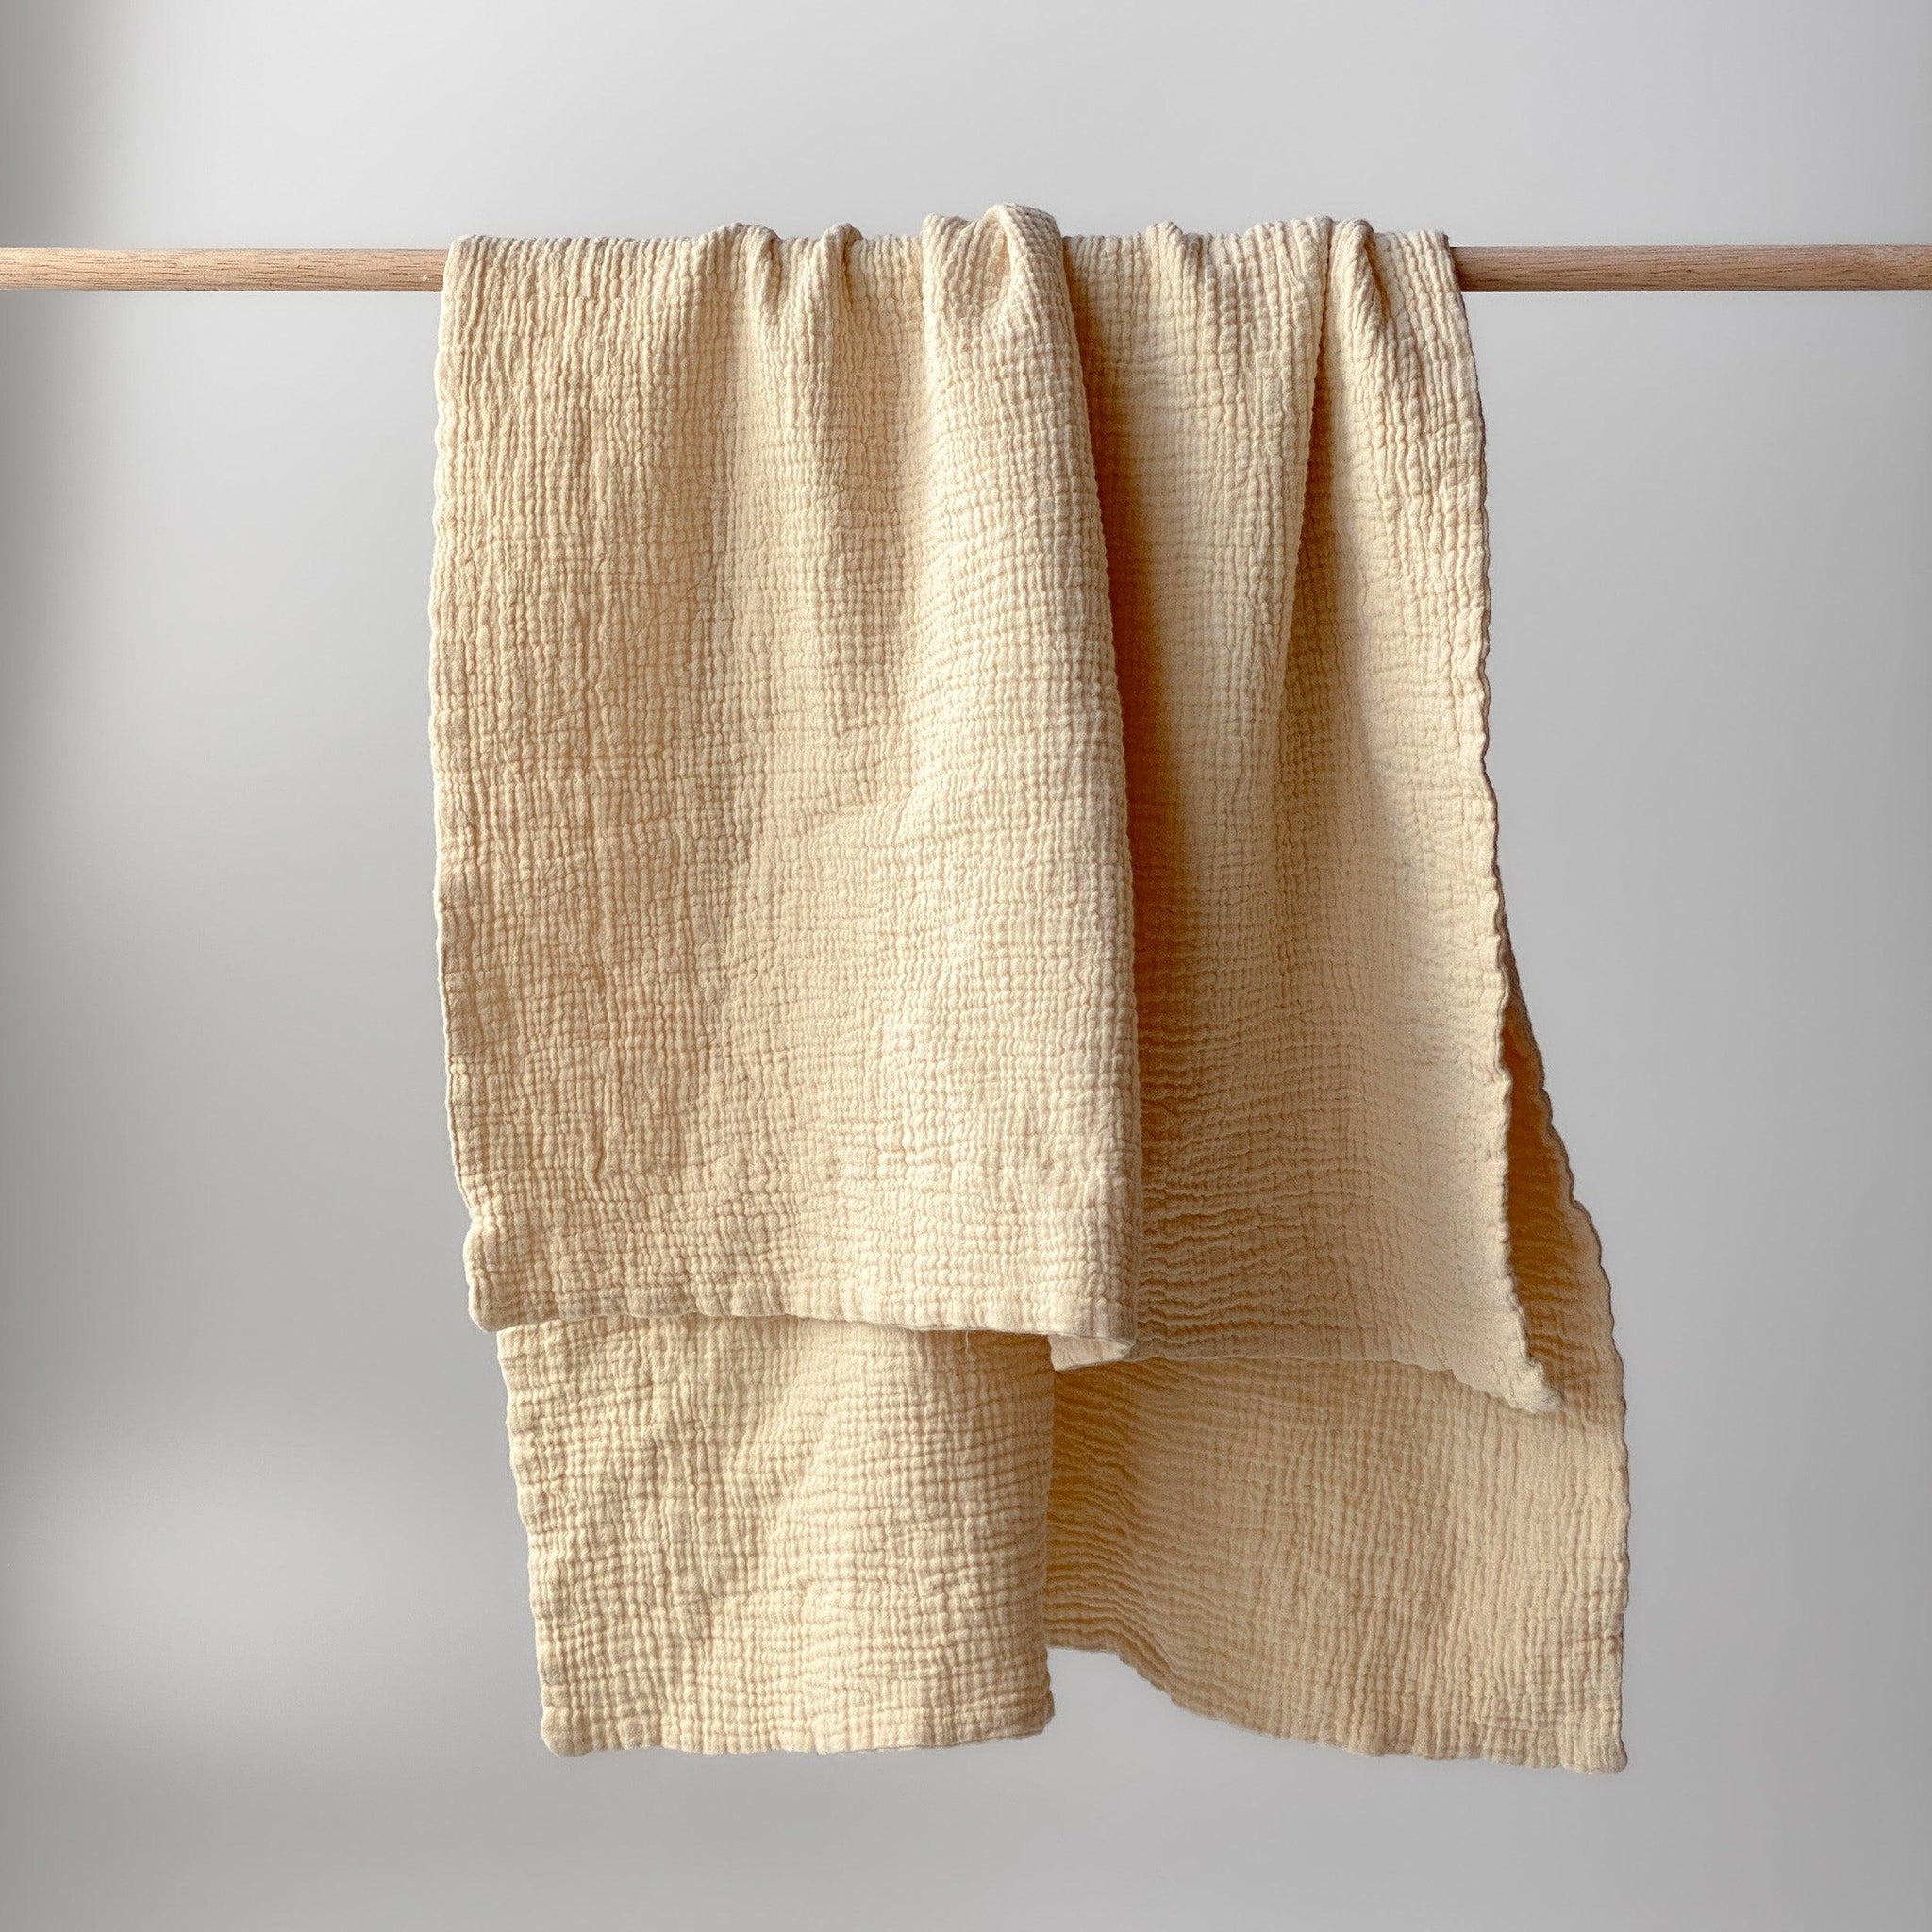 Thick Cotton Muslin Towel - LARGE 42X53 - Many Colors Available - Charley Charles